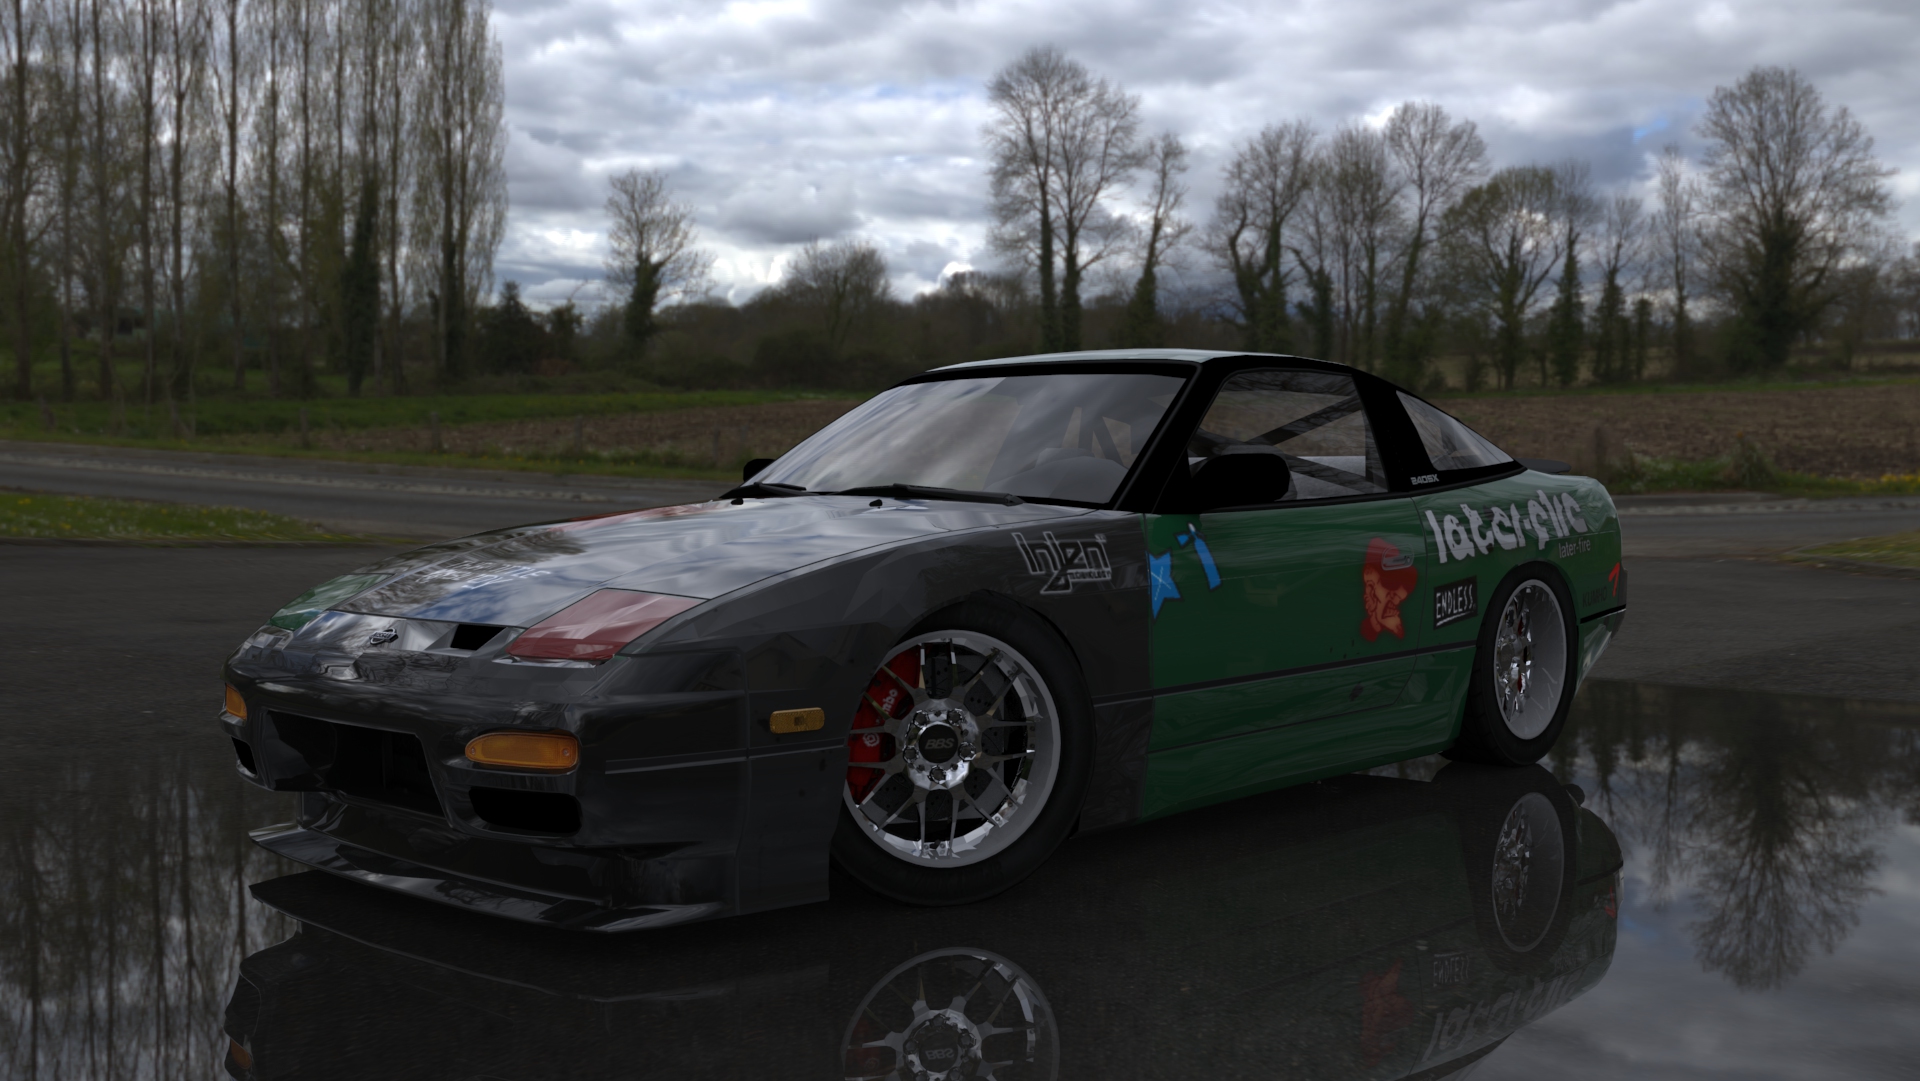 General 1920x1081 Nissan 240SX Ryan Cooper Need for Speed: ProStreet pop-up headlights Nissan Japanese cars video games Electronic Arts Straight-four engine